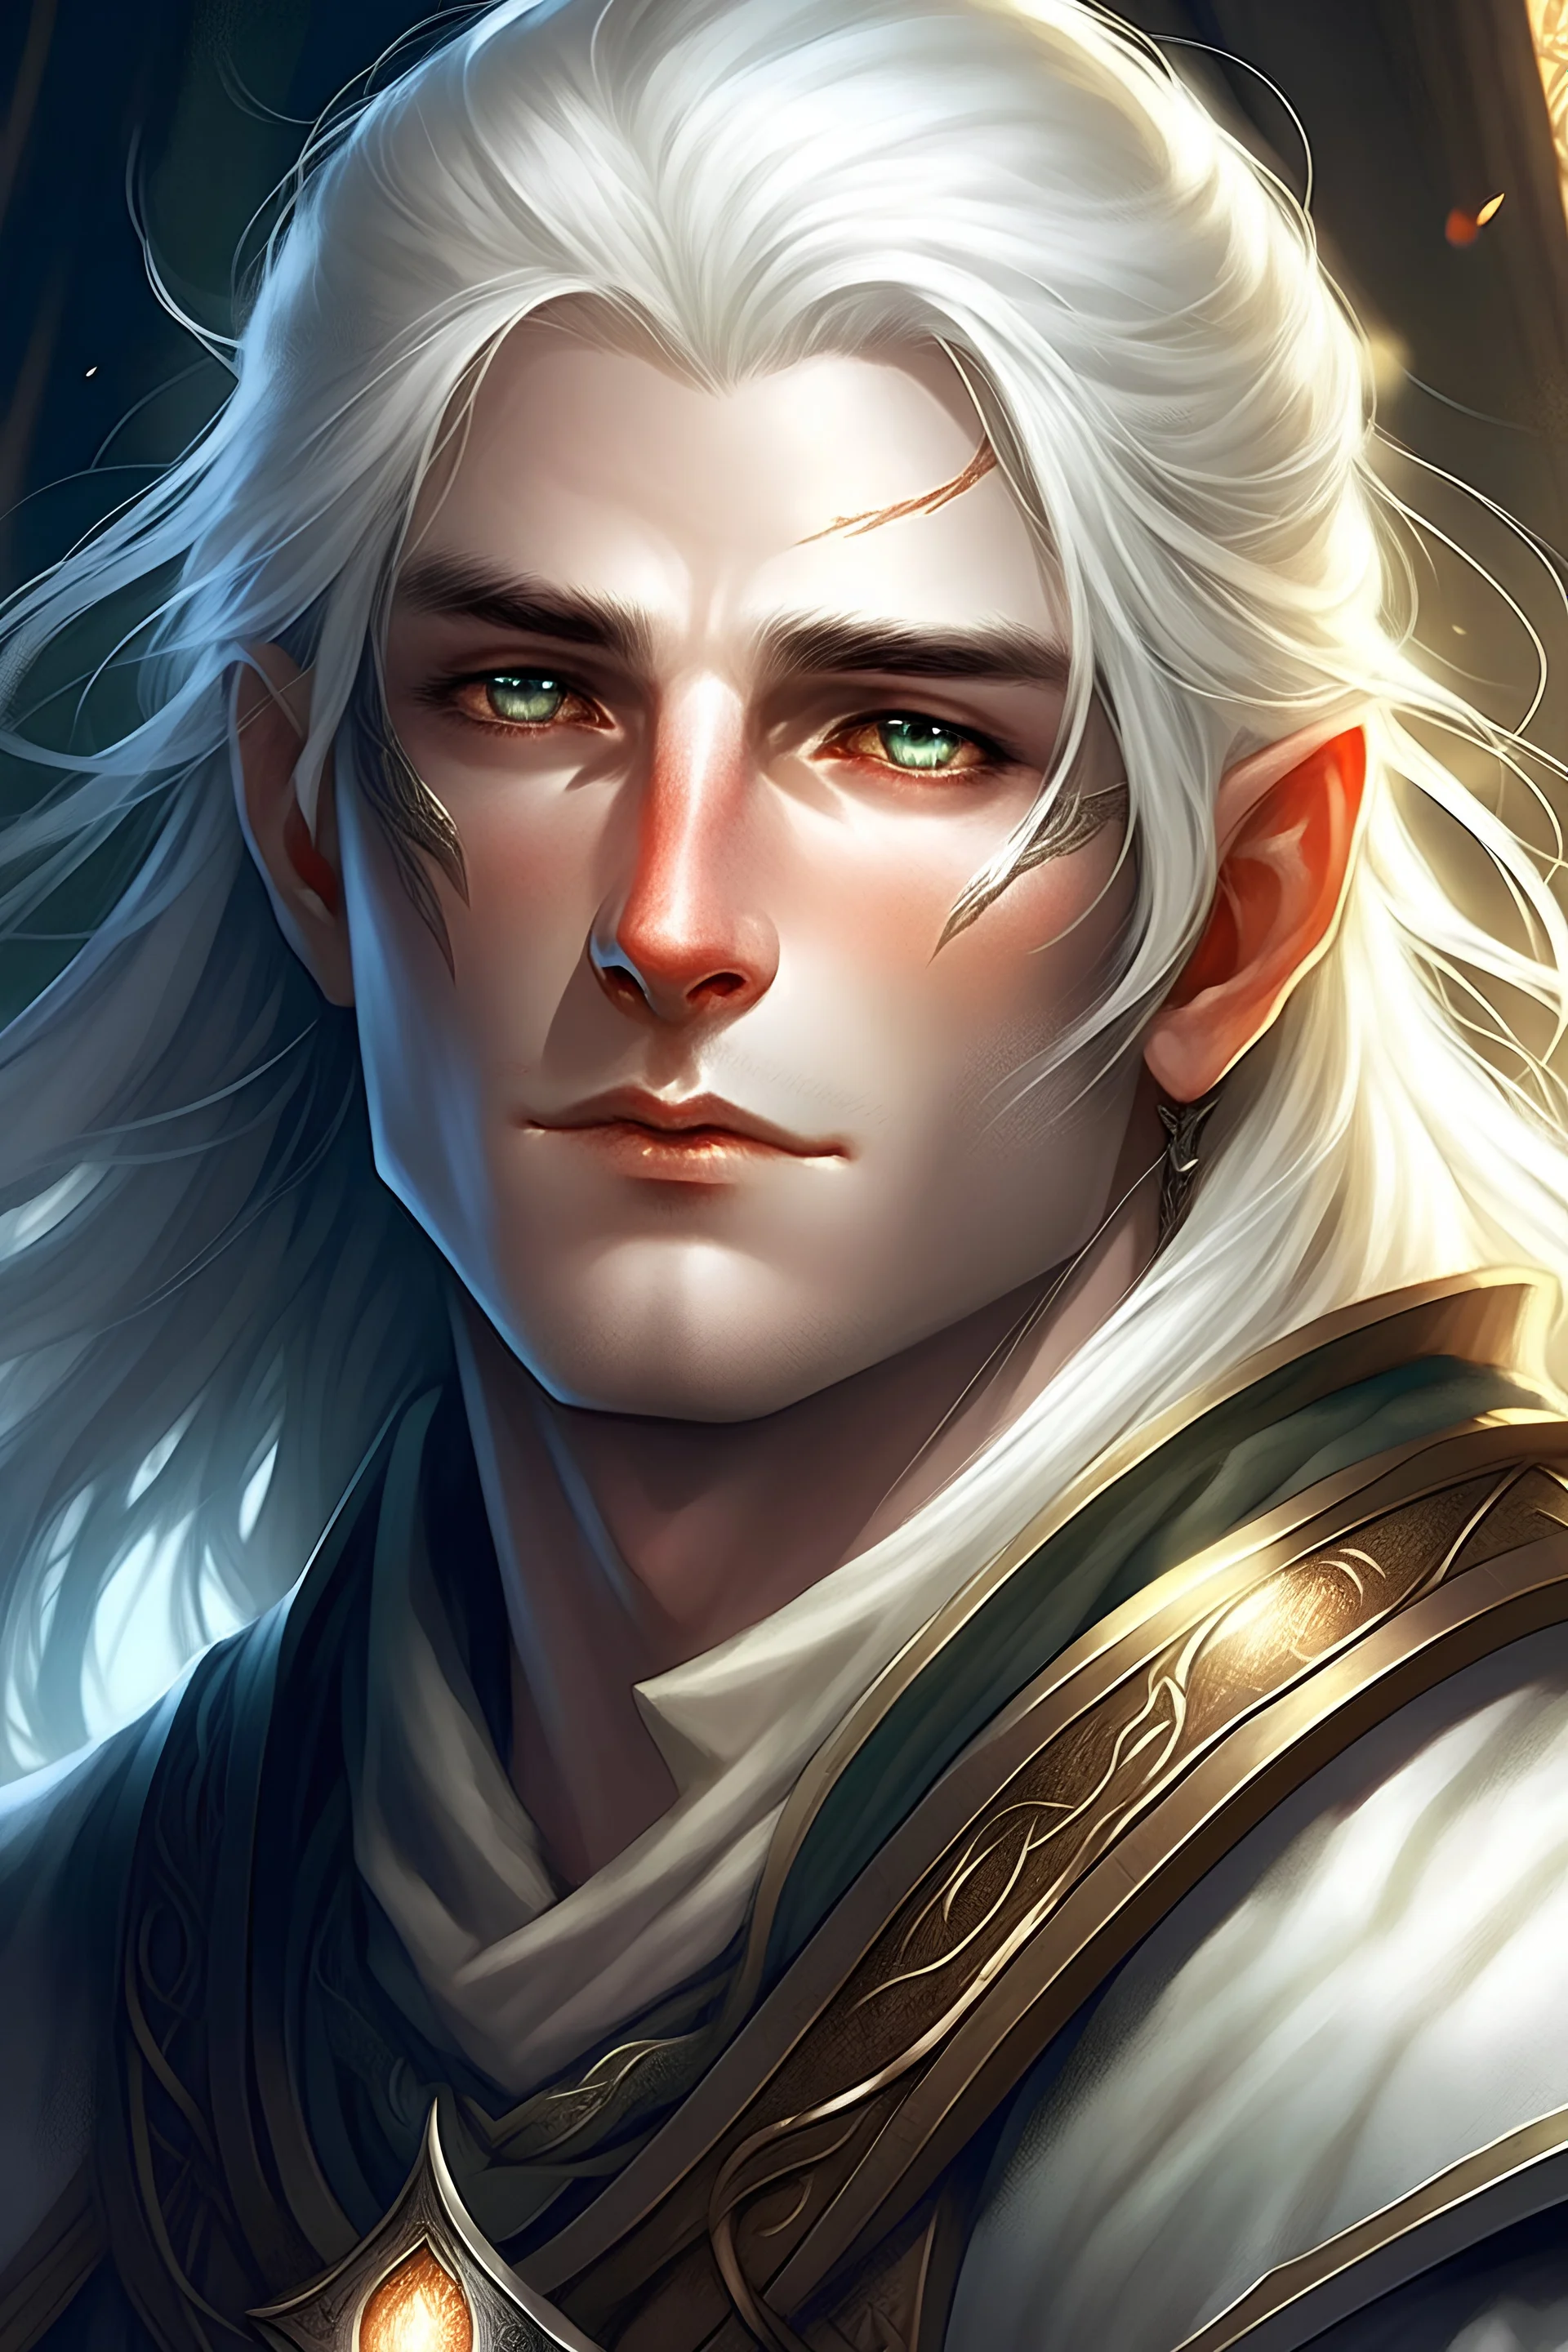 Baldur the young beautiful powerful norse god of light with white hair and eyes